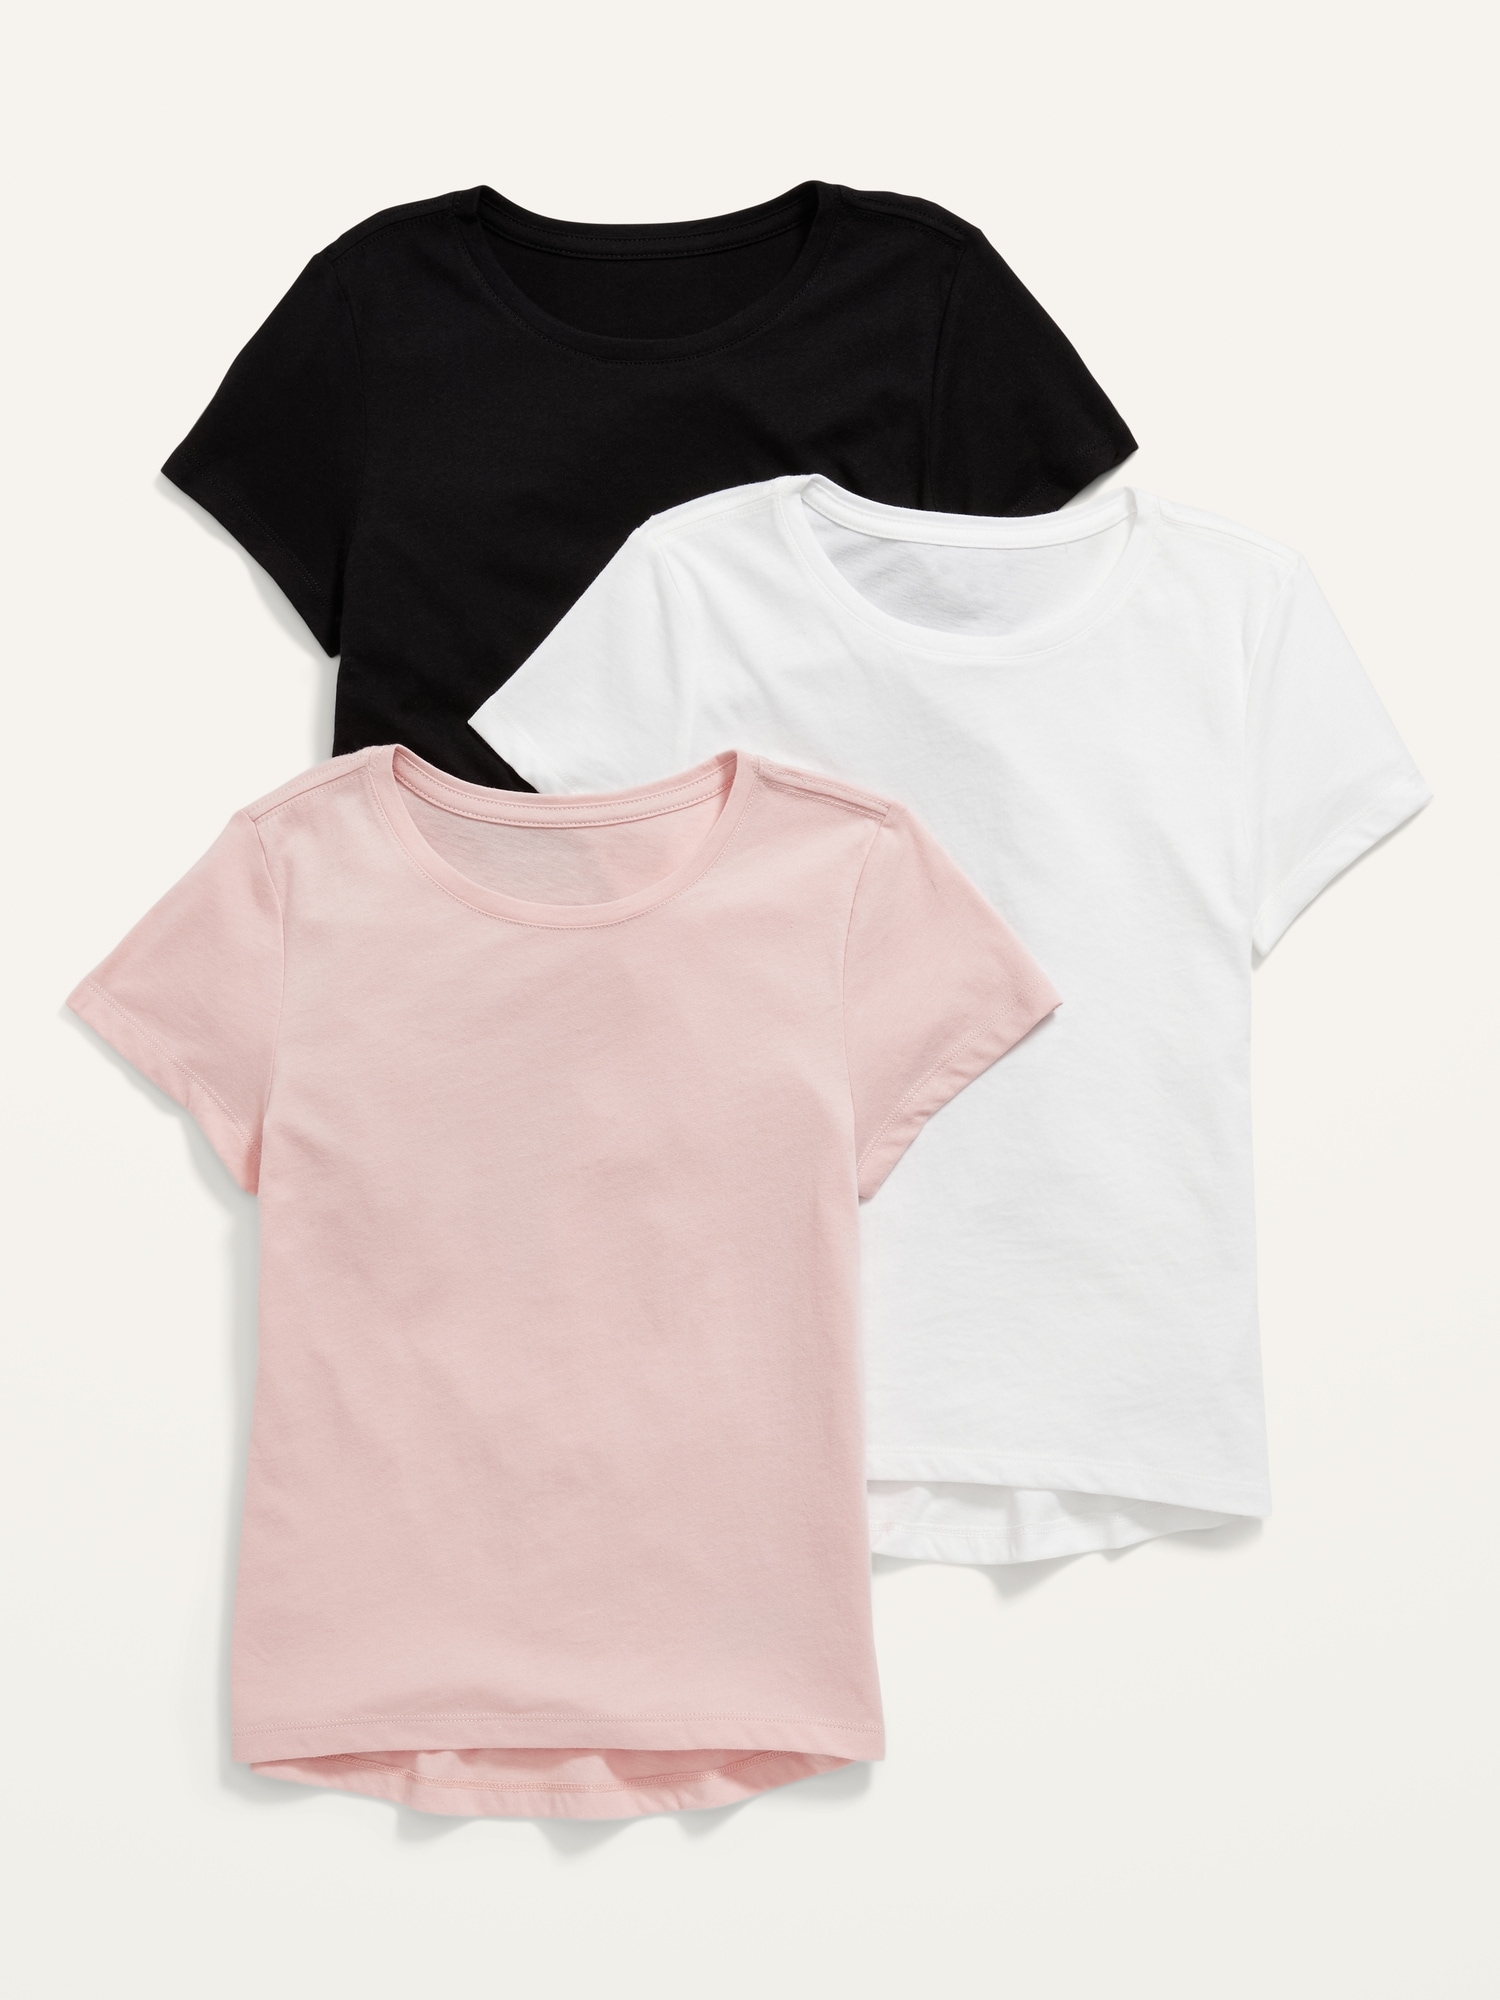 Old Navy Softest Short-Sleeve Solid T-Shirt 3-Pack for Girls multi. 1